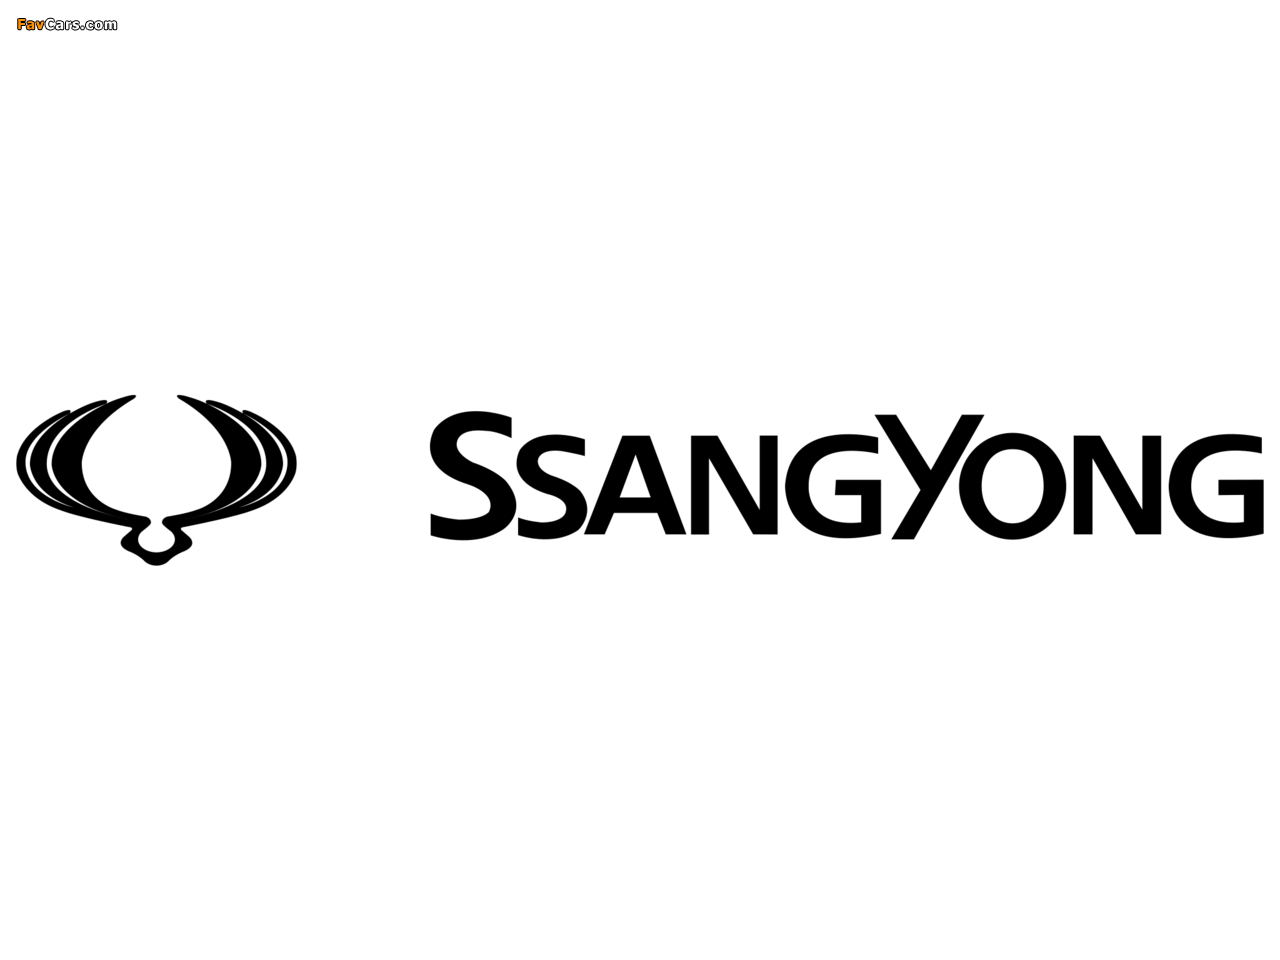 Images of SsangYong (1280 x 960)